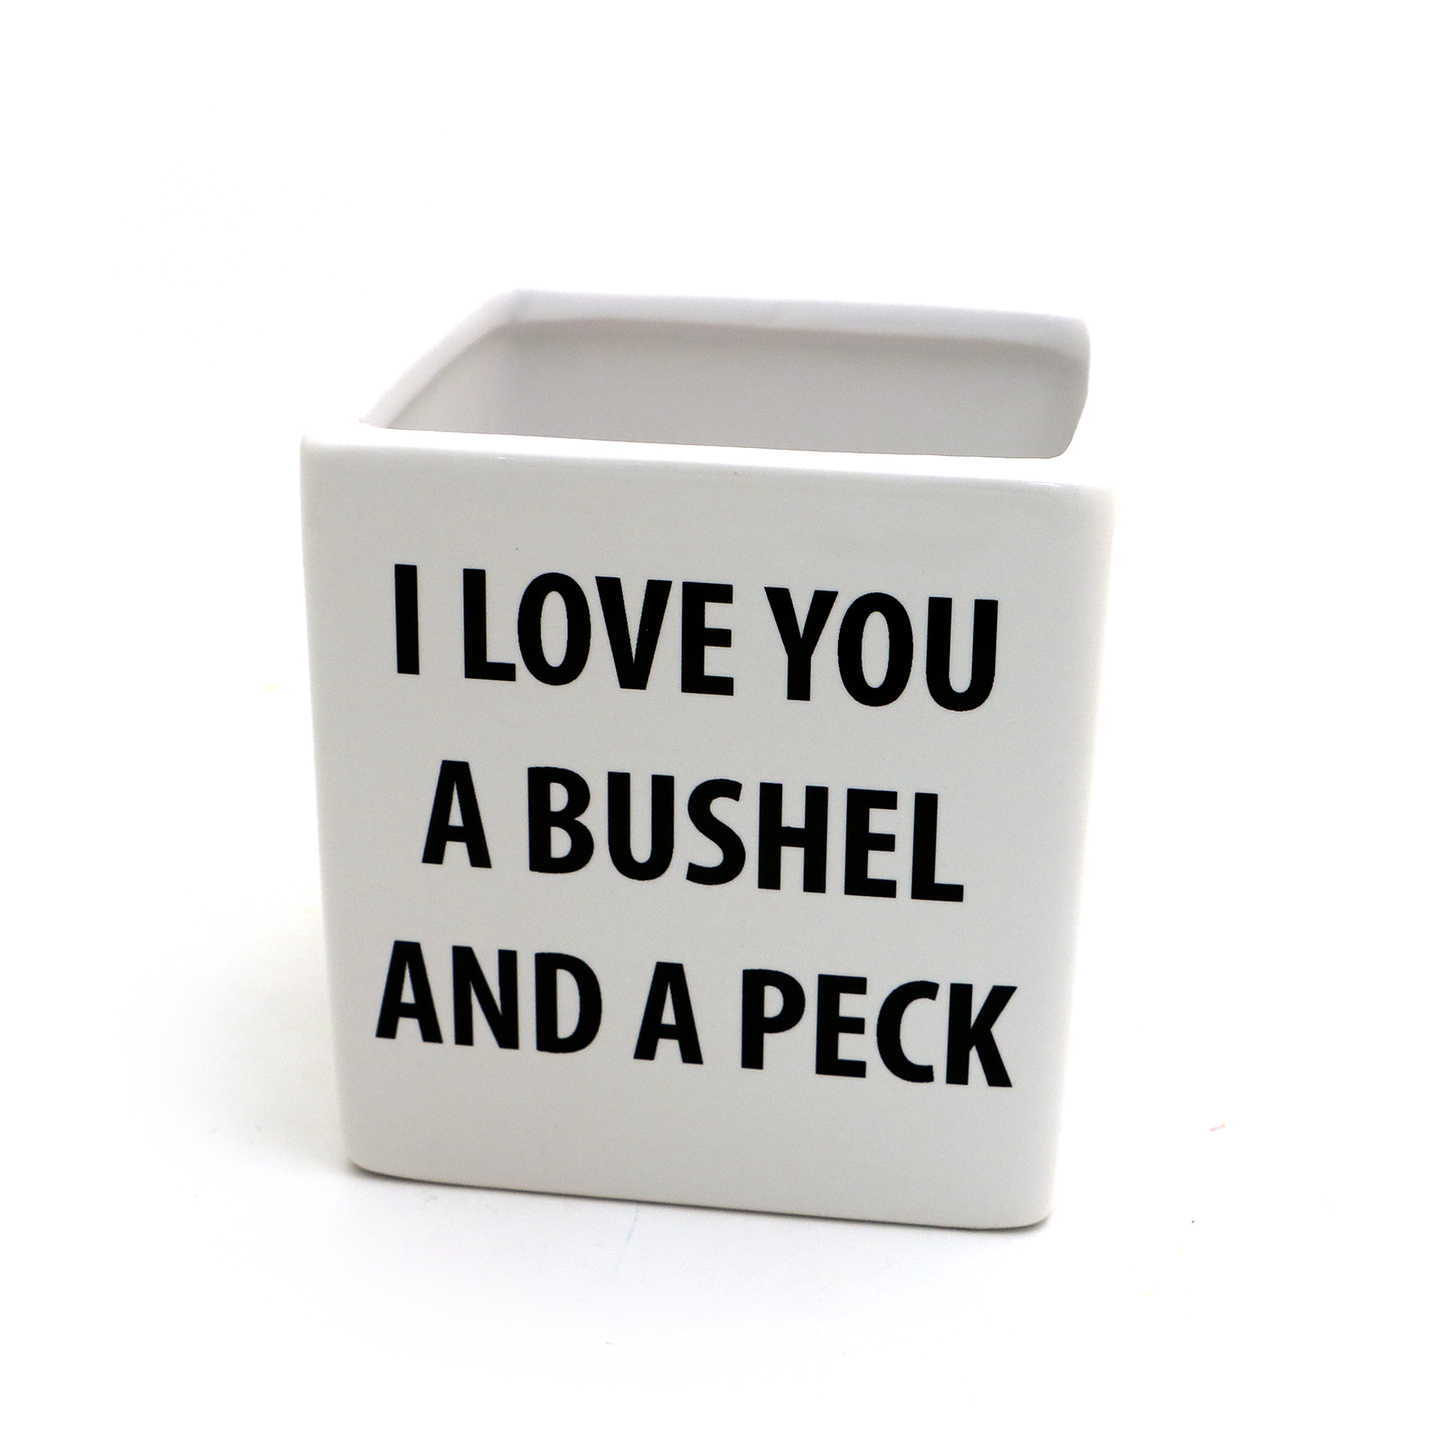 Bushel and a Peck Planter, indoor planter, container